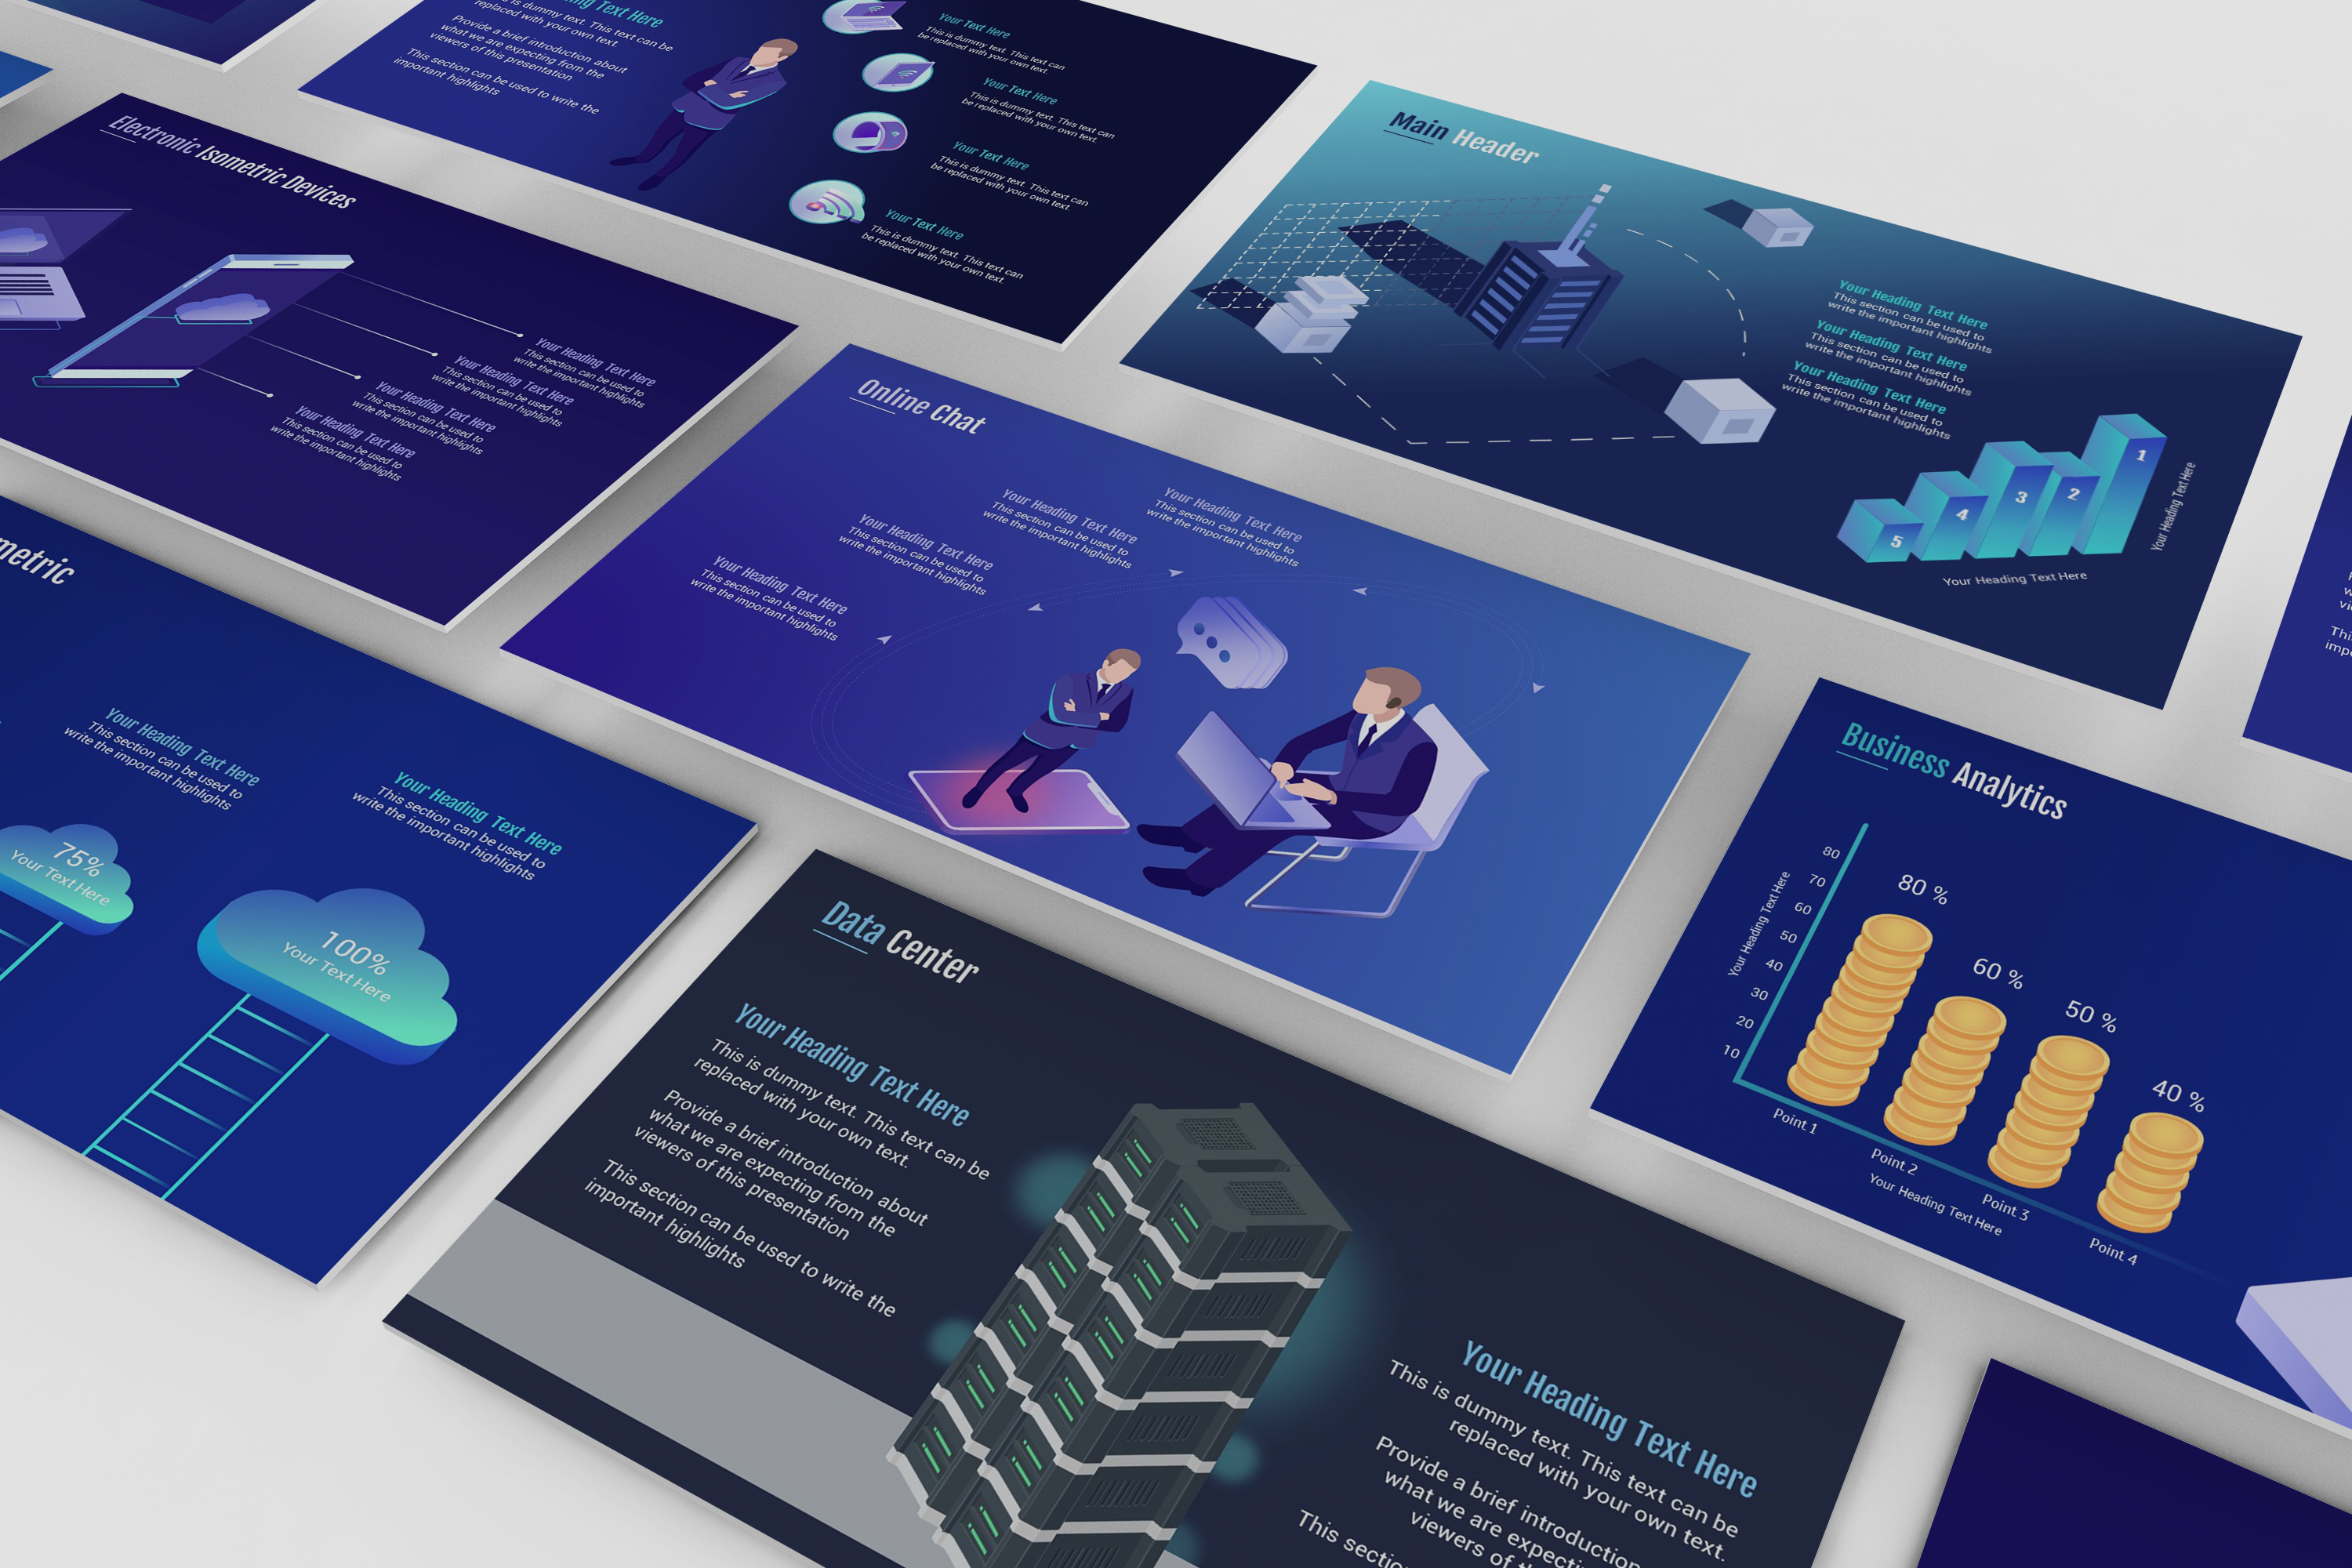 your technology powerpoint templates